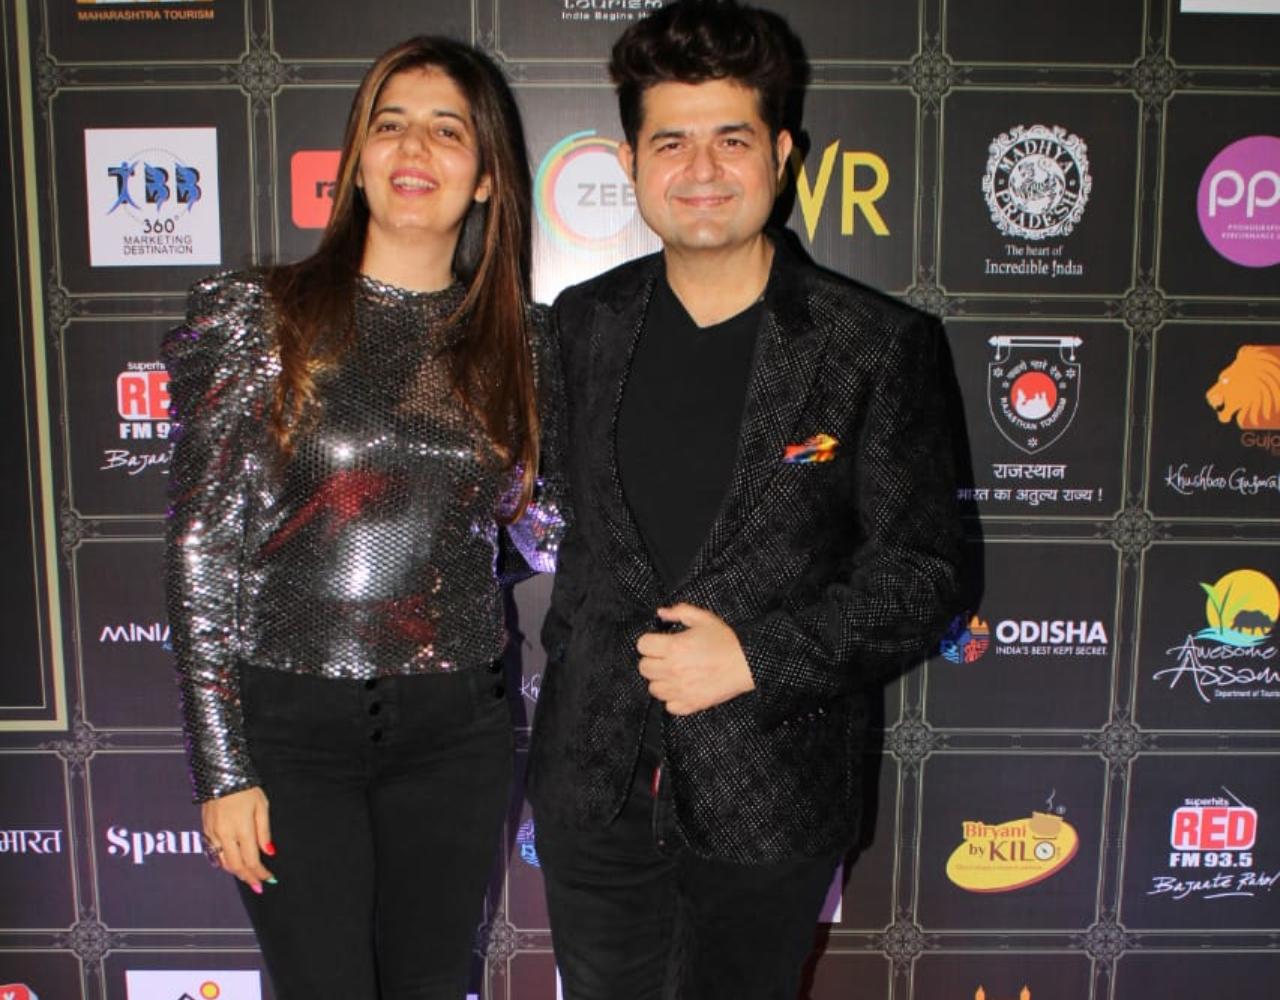 Daboo Ratnani was clicked with his wife Manisha Ratnani. The husband-wife duo twinned in their black outfits.